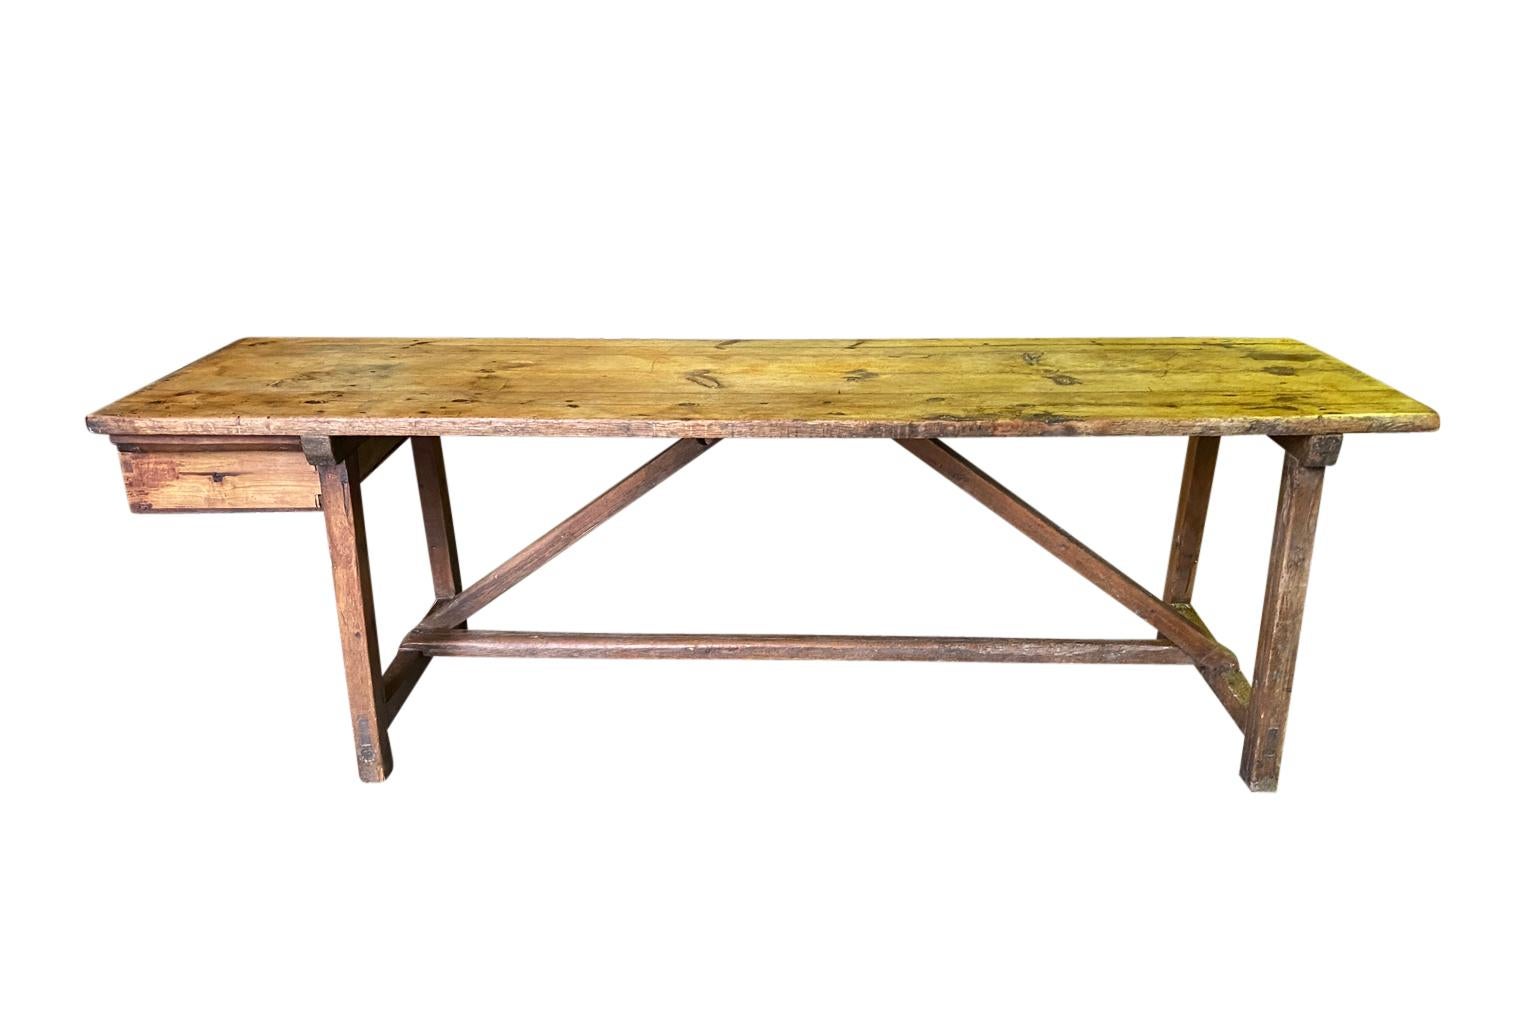 A very stunning mid-18th century Farm Table - Trestle Table from the Tuscan region of Italy. Soundly constructed from well patina'd pine with a removable drawer. Super patina.